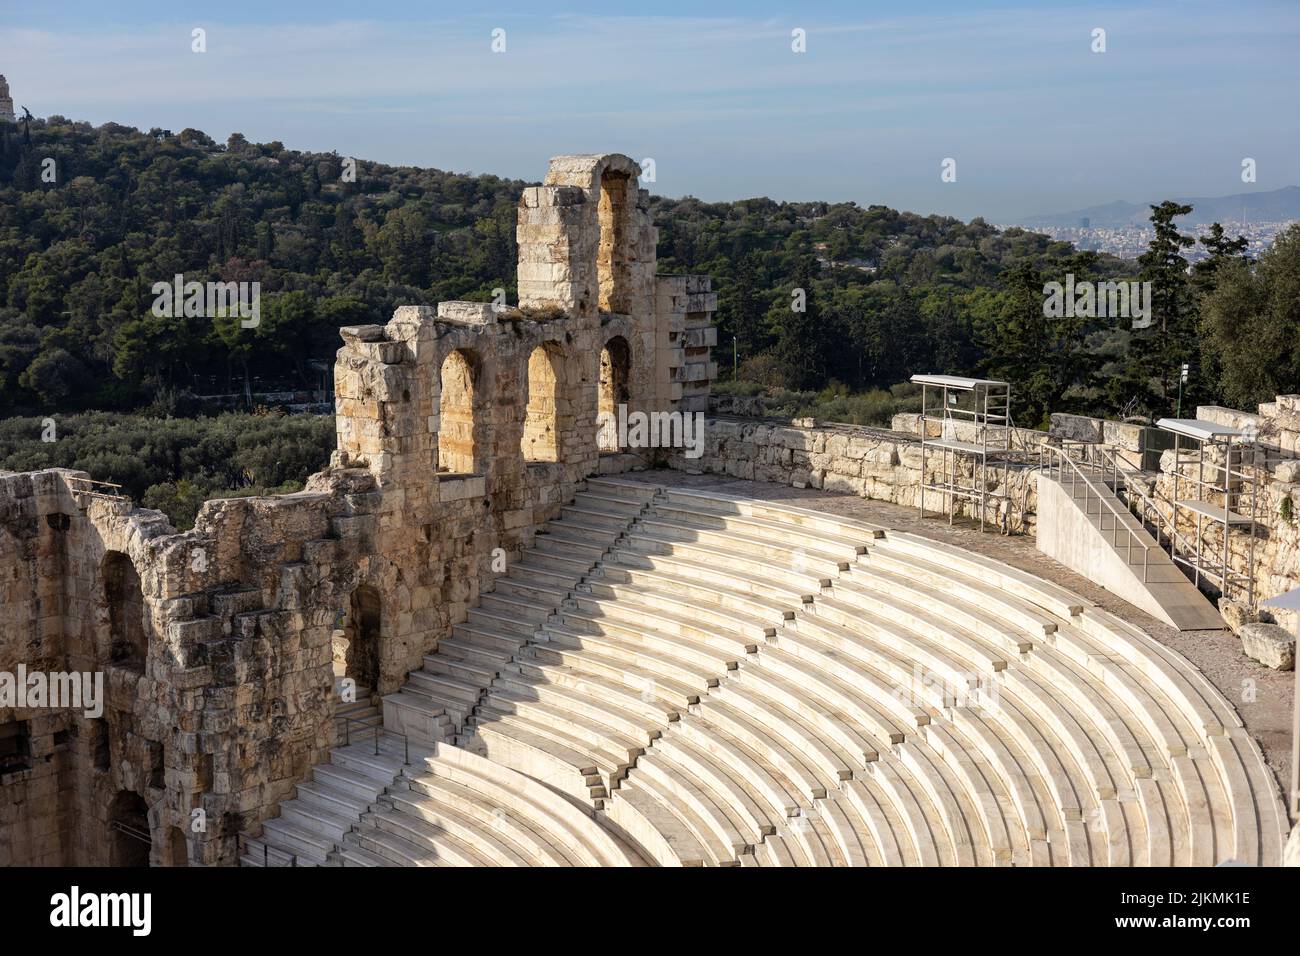 A scenic view of the Odeon of Herodes Atticus theatre structure in Athens, Greece Stock Photo